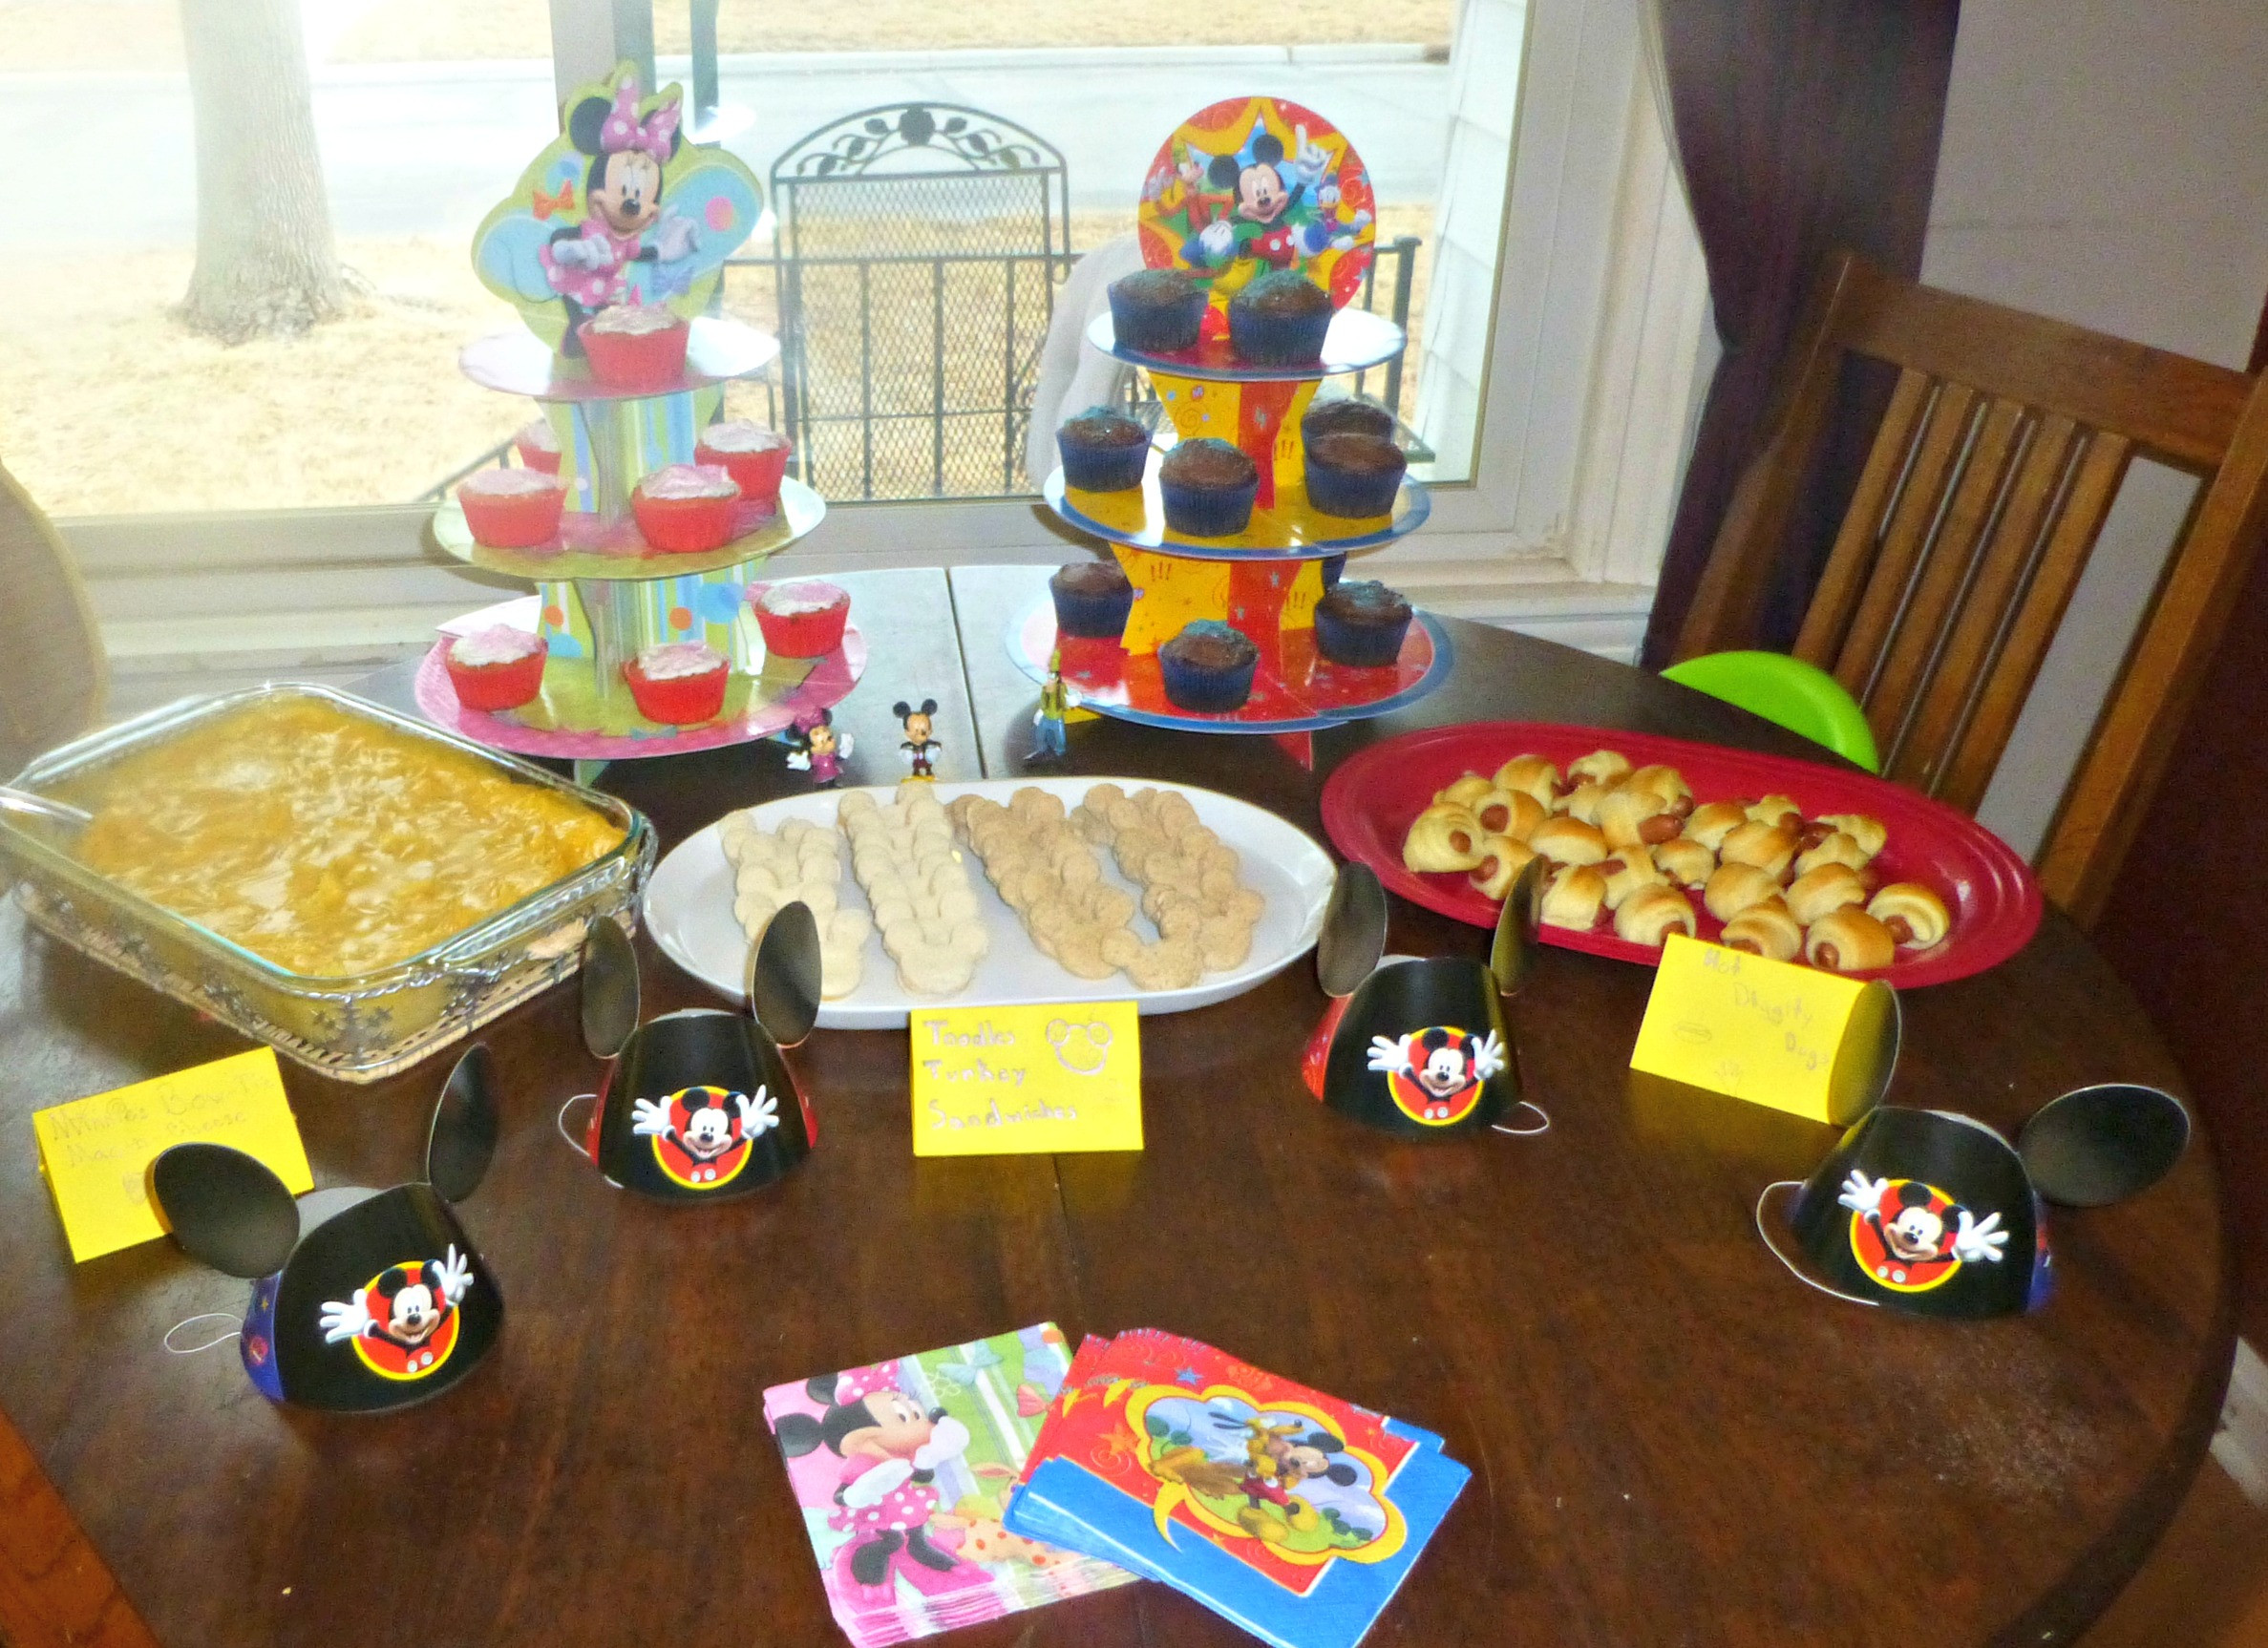 Mickey Mouse Clubhouse Birthday Party Decorations
 Mickey Mouse Clubhouse Themed Birthday Party